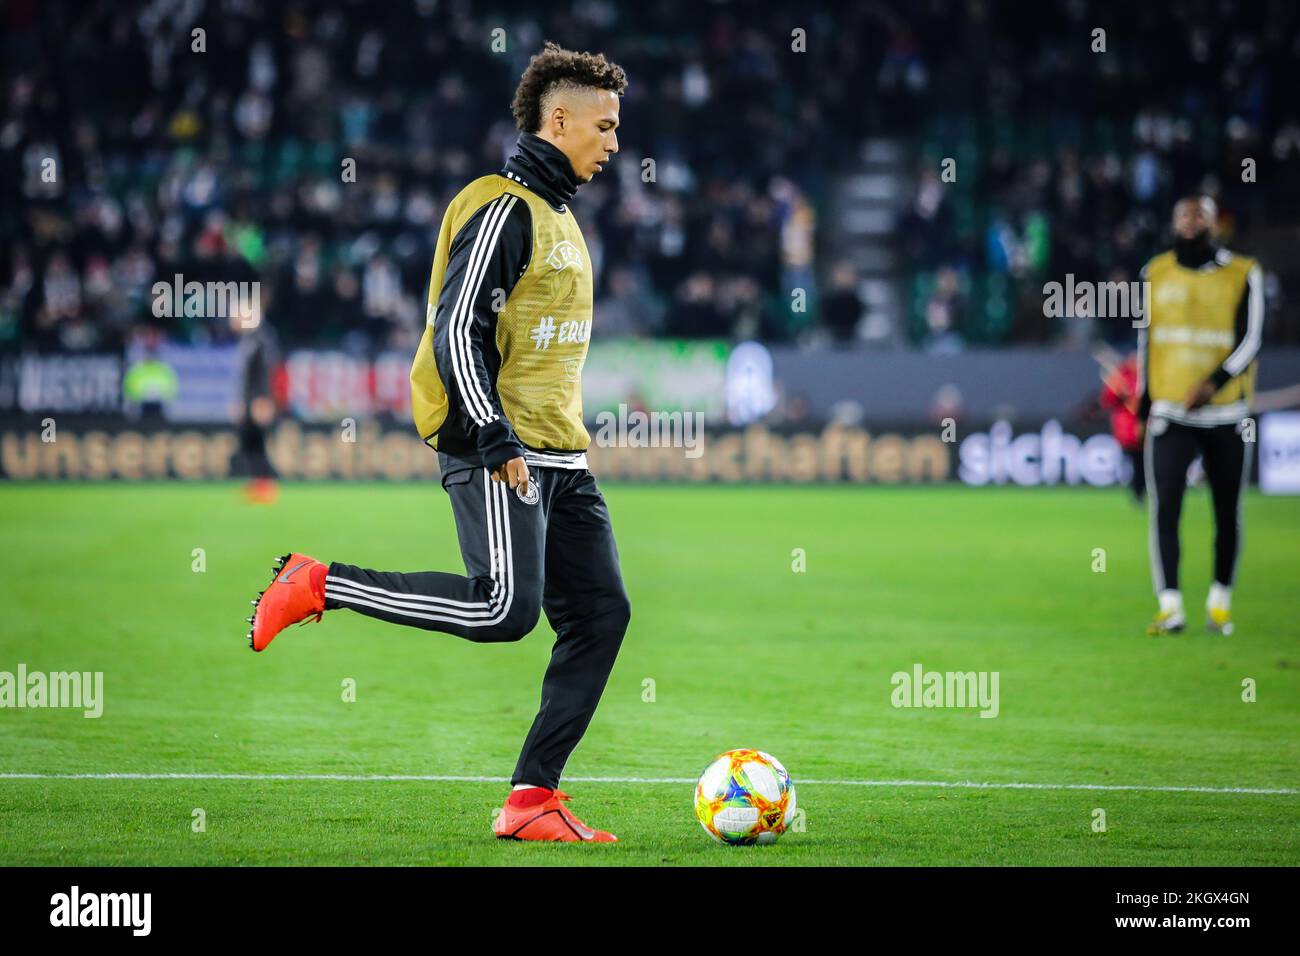 Wolfsburg, Germany, March 20, 2019: Thilo Kehrer in action during the warm-up session before the soccer match between Germany and Serbia Stock Photo